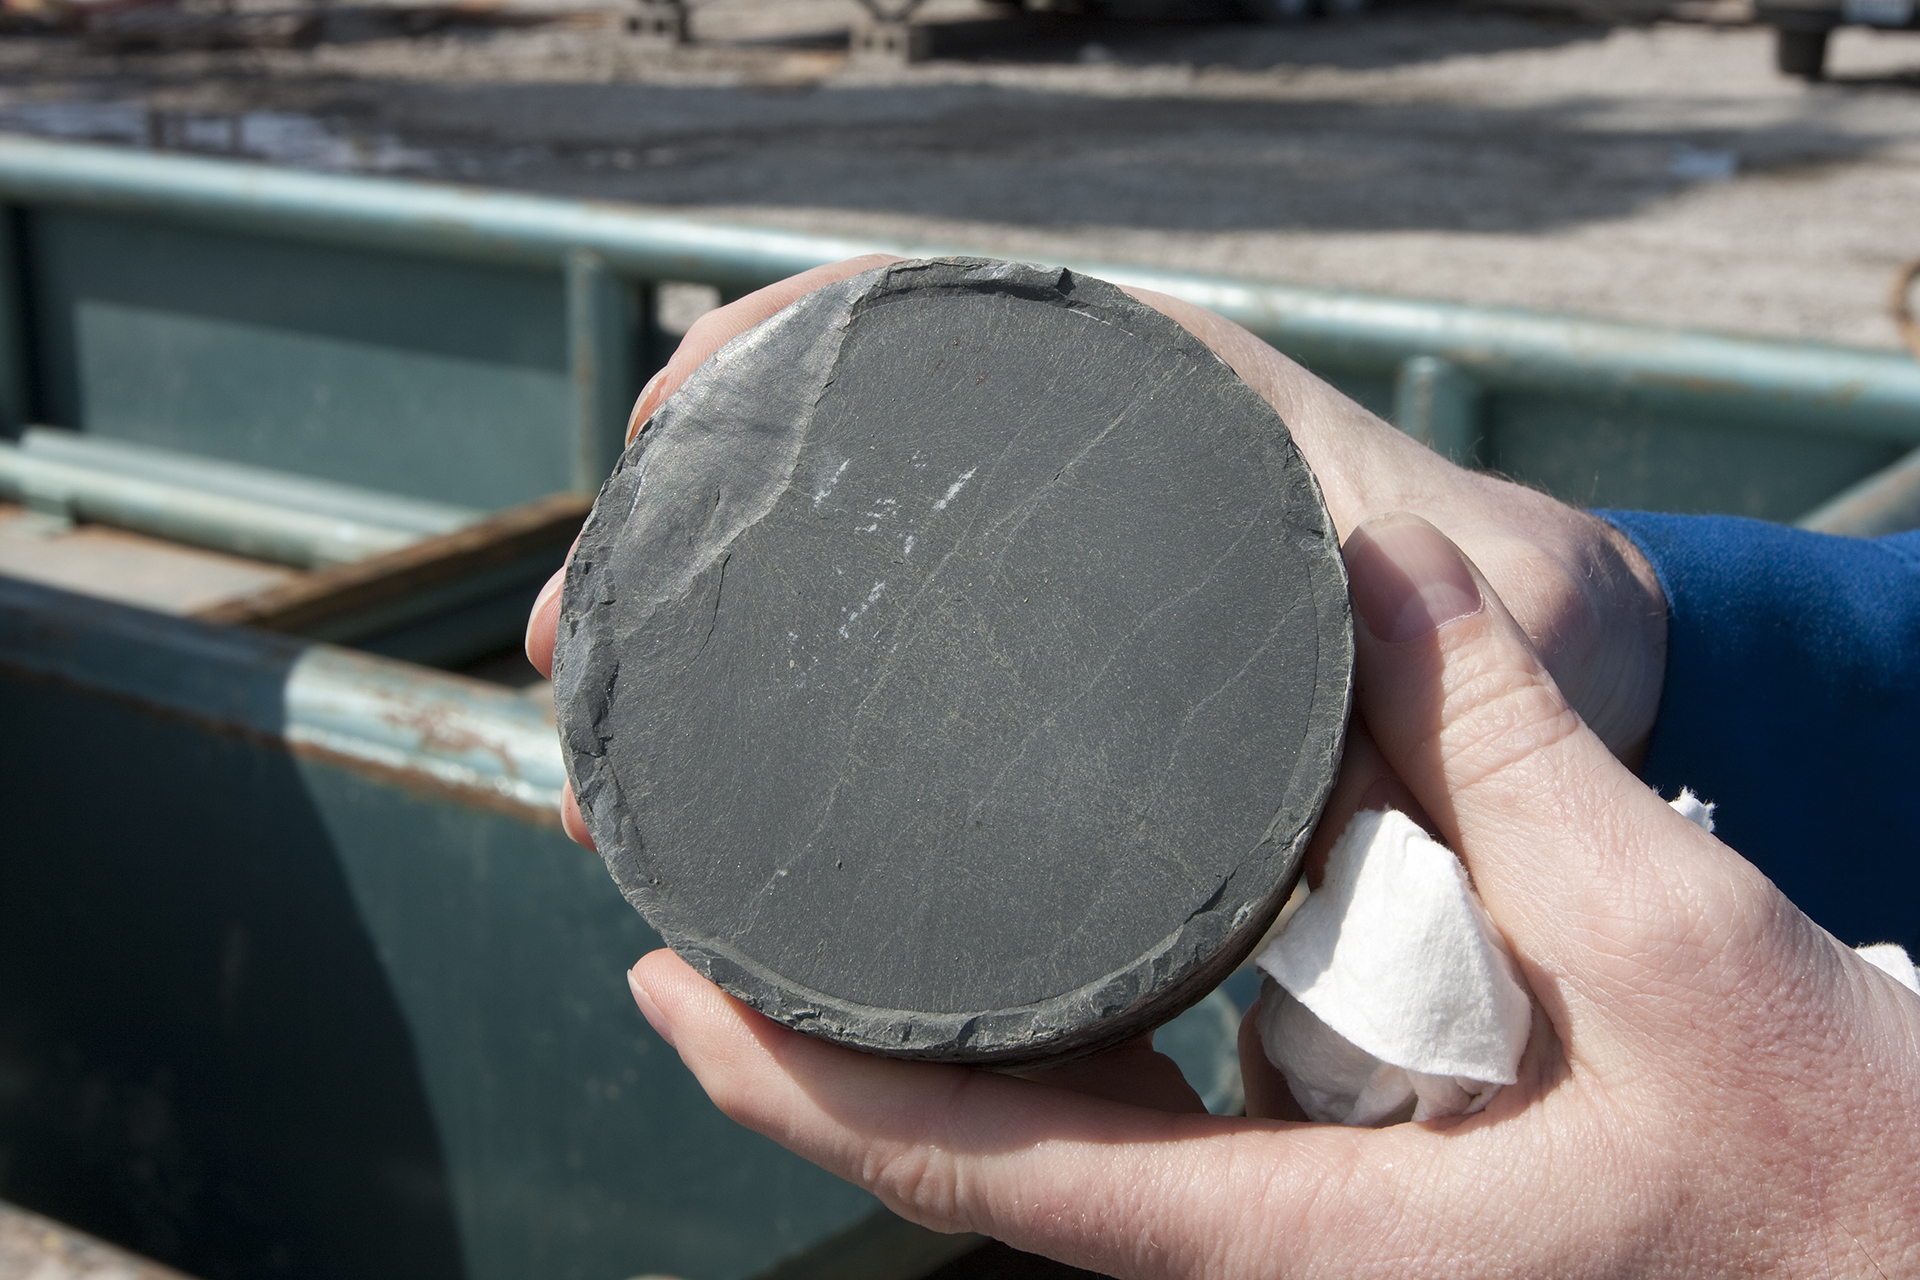 A piece of the Eau Claire shale from coring the injection well at IBDP.